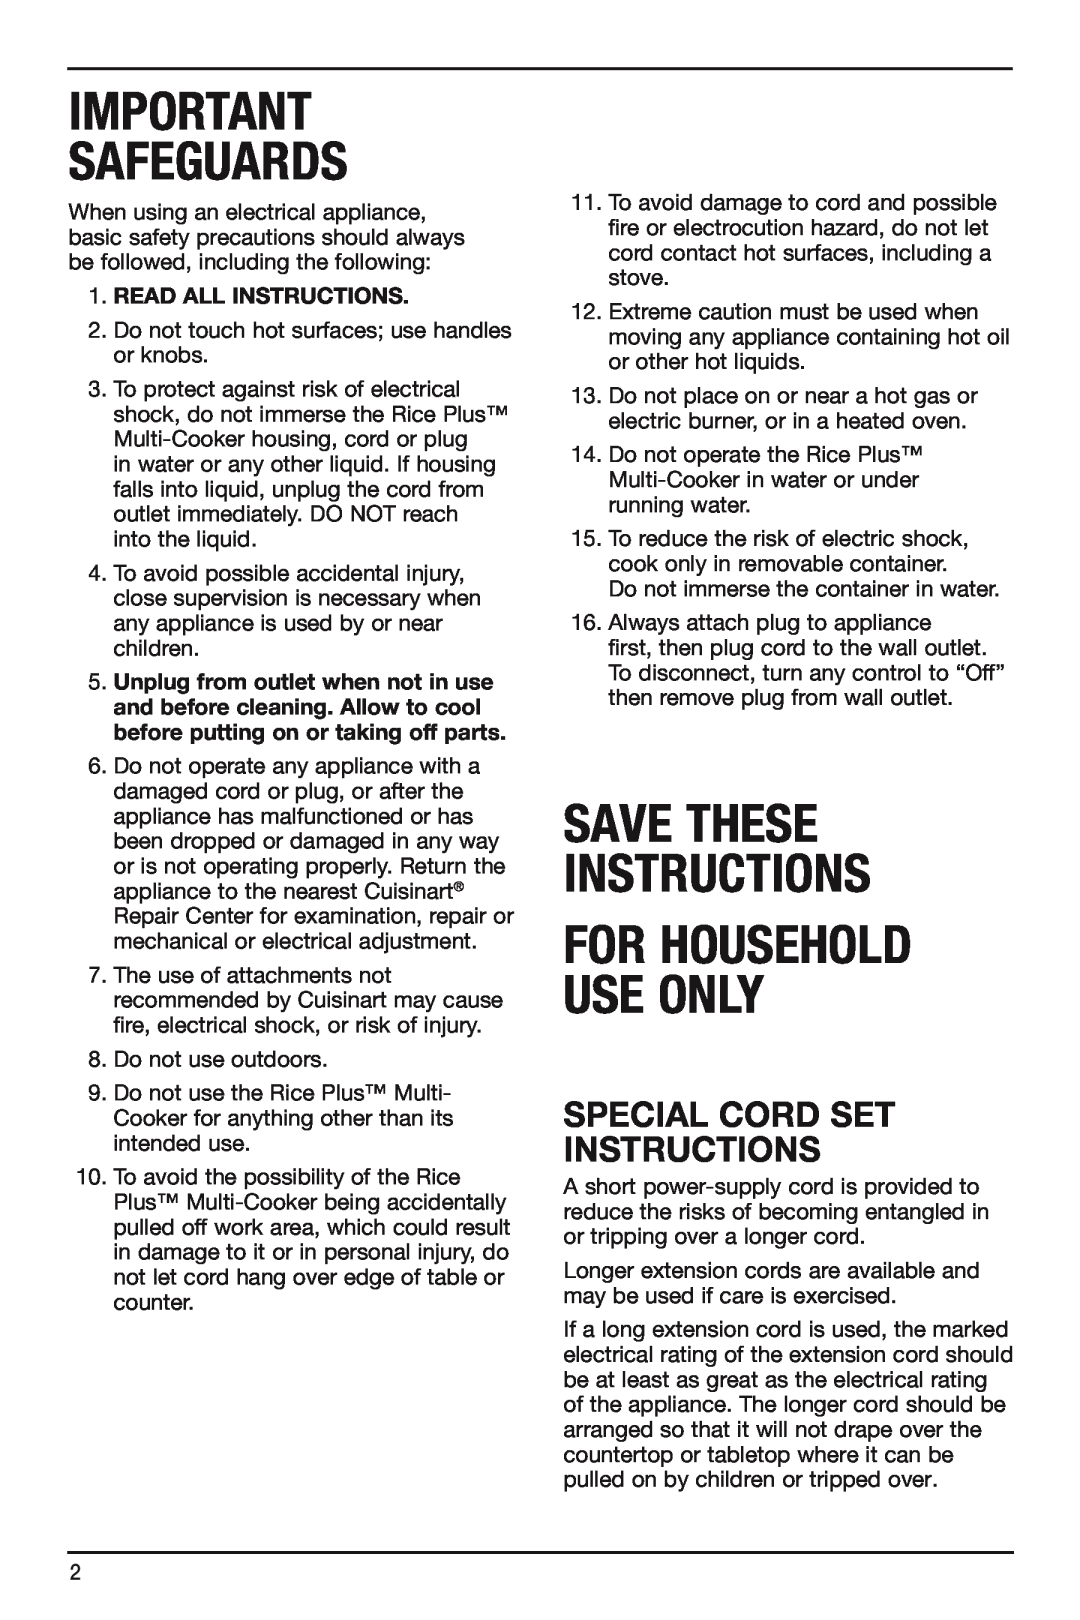 Cuisinart FRC-800 manual Special Cord Set Instructions, Safeguards, Save These Instructions, For Household Use Only 